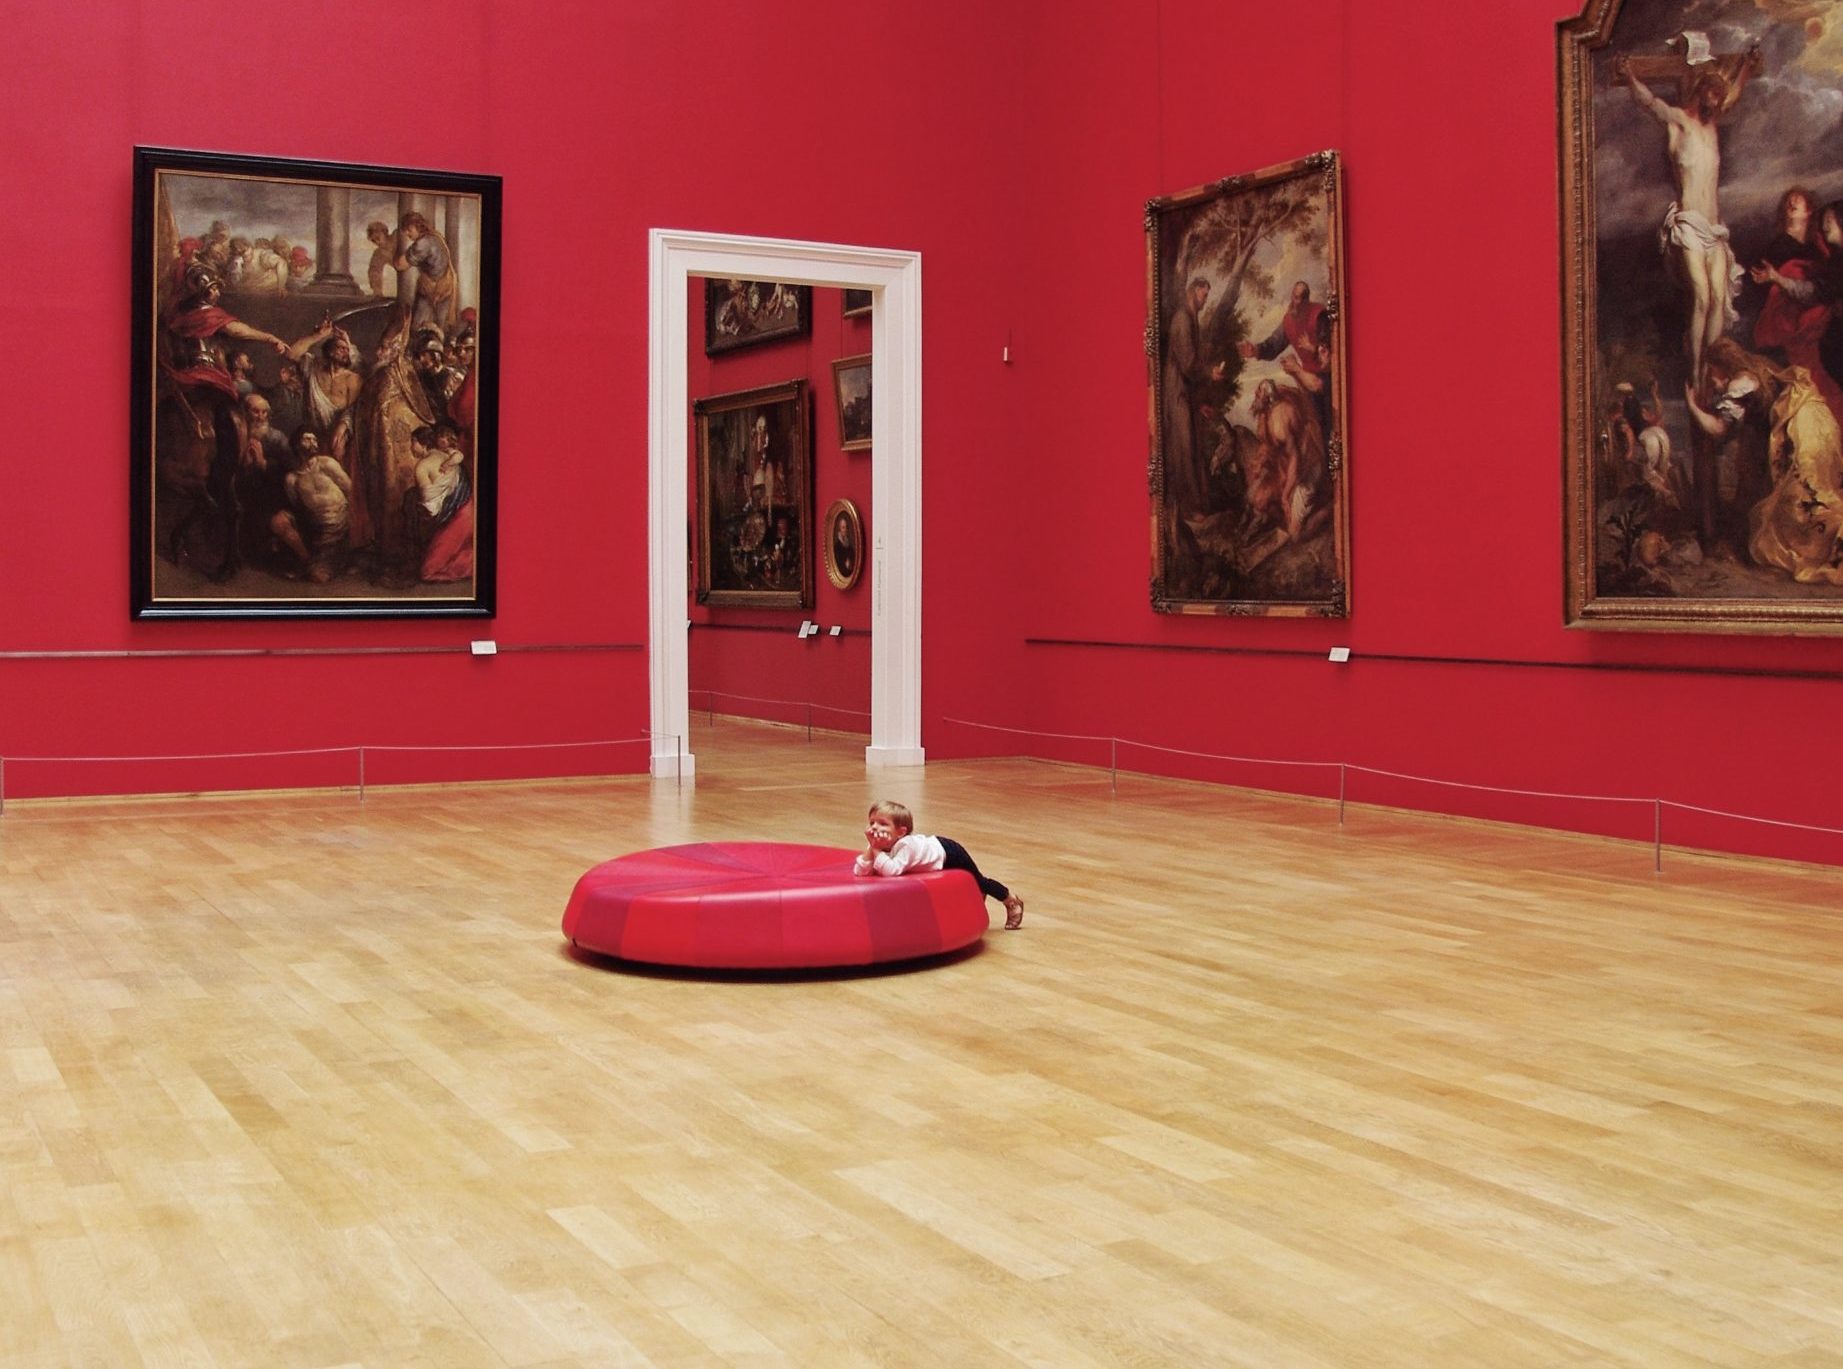 Small Toddler alone in Art Museum